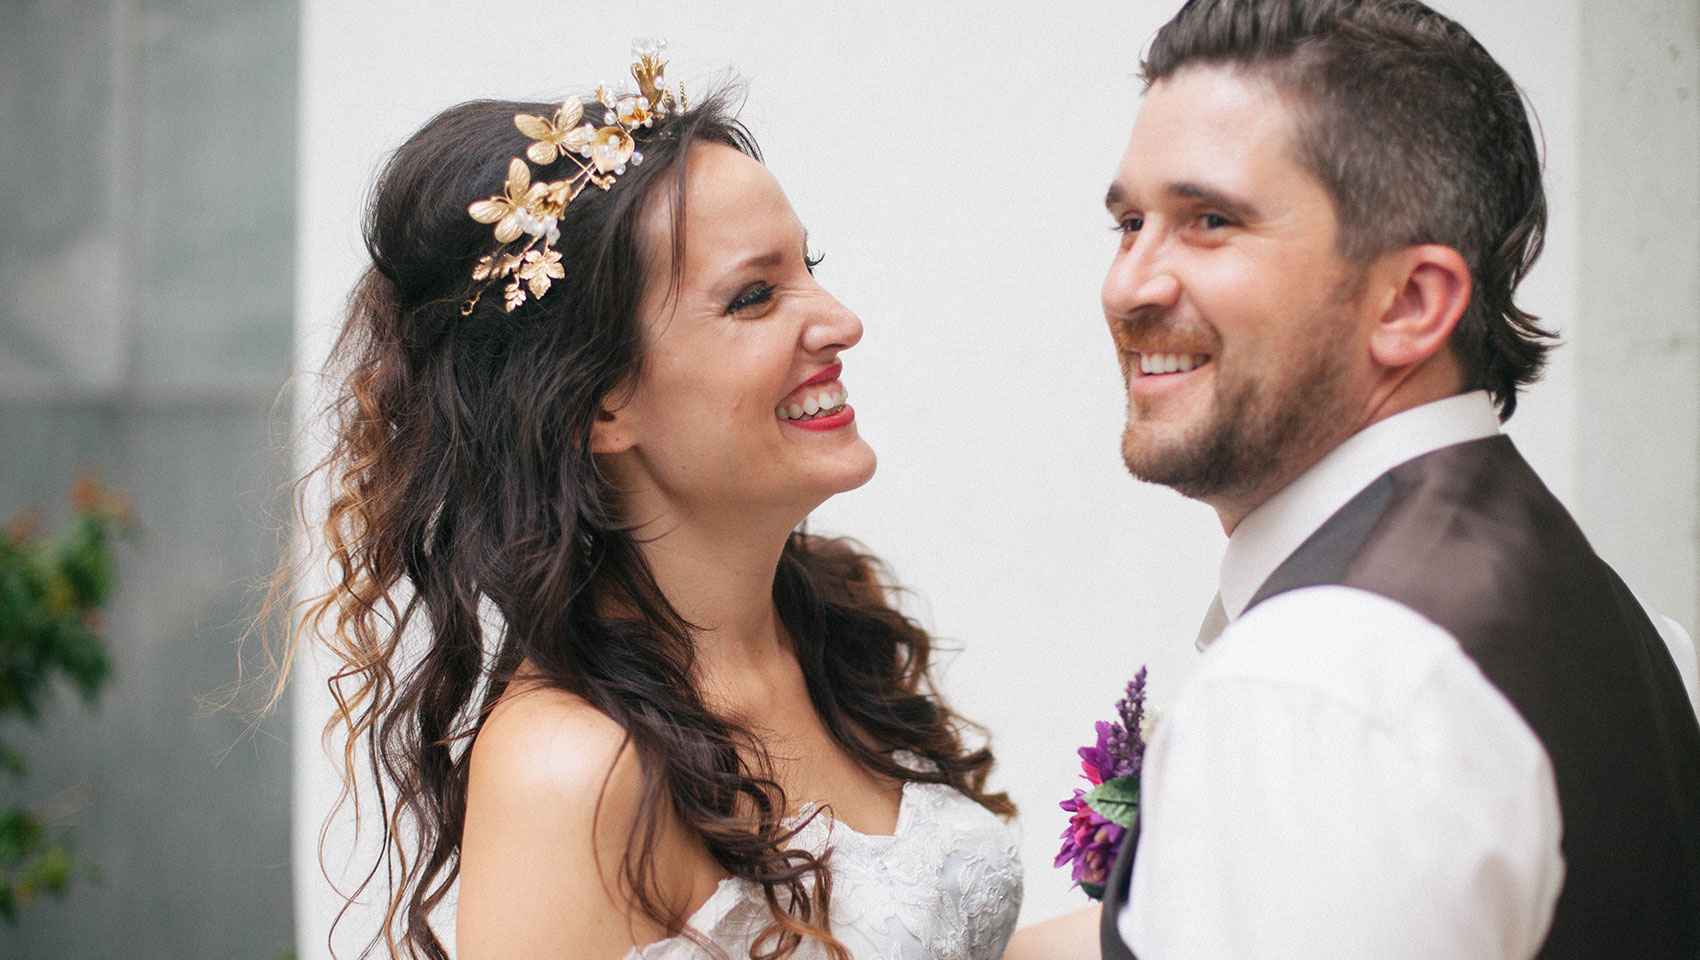 bride with flower crown smiling with groom in tuxedo vest